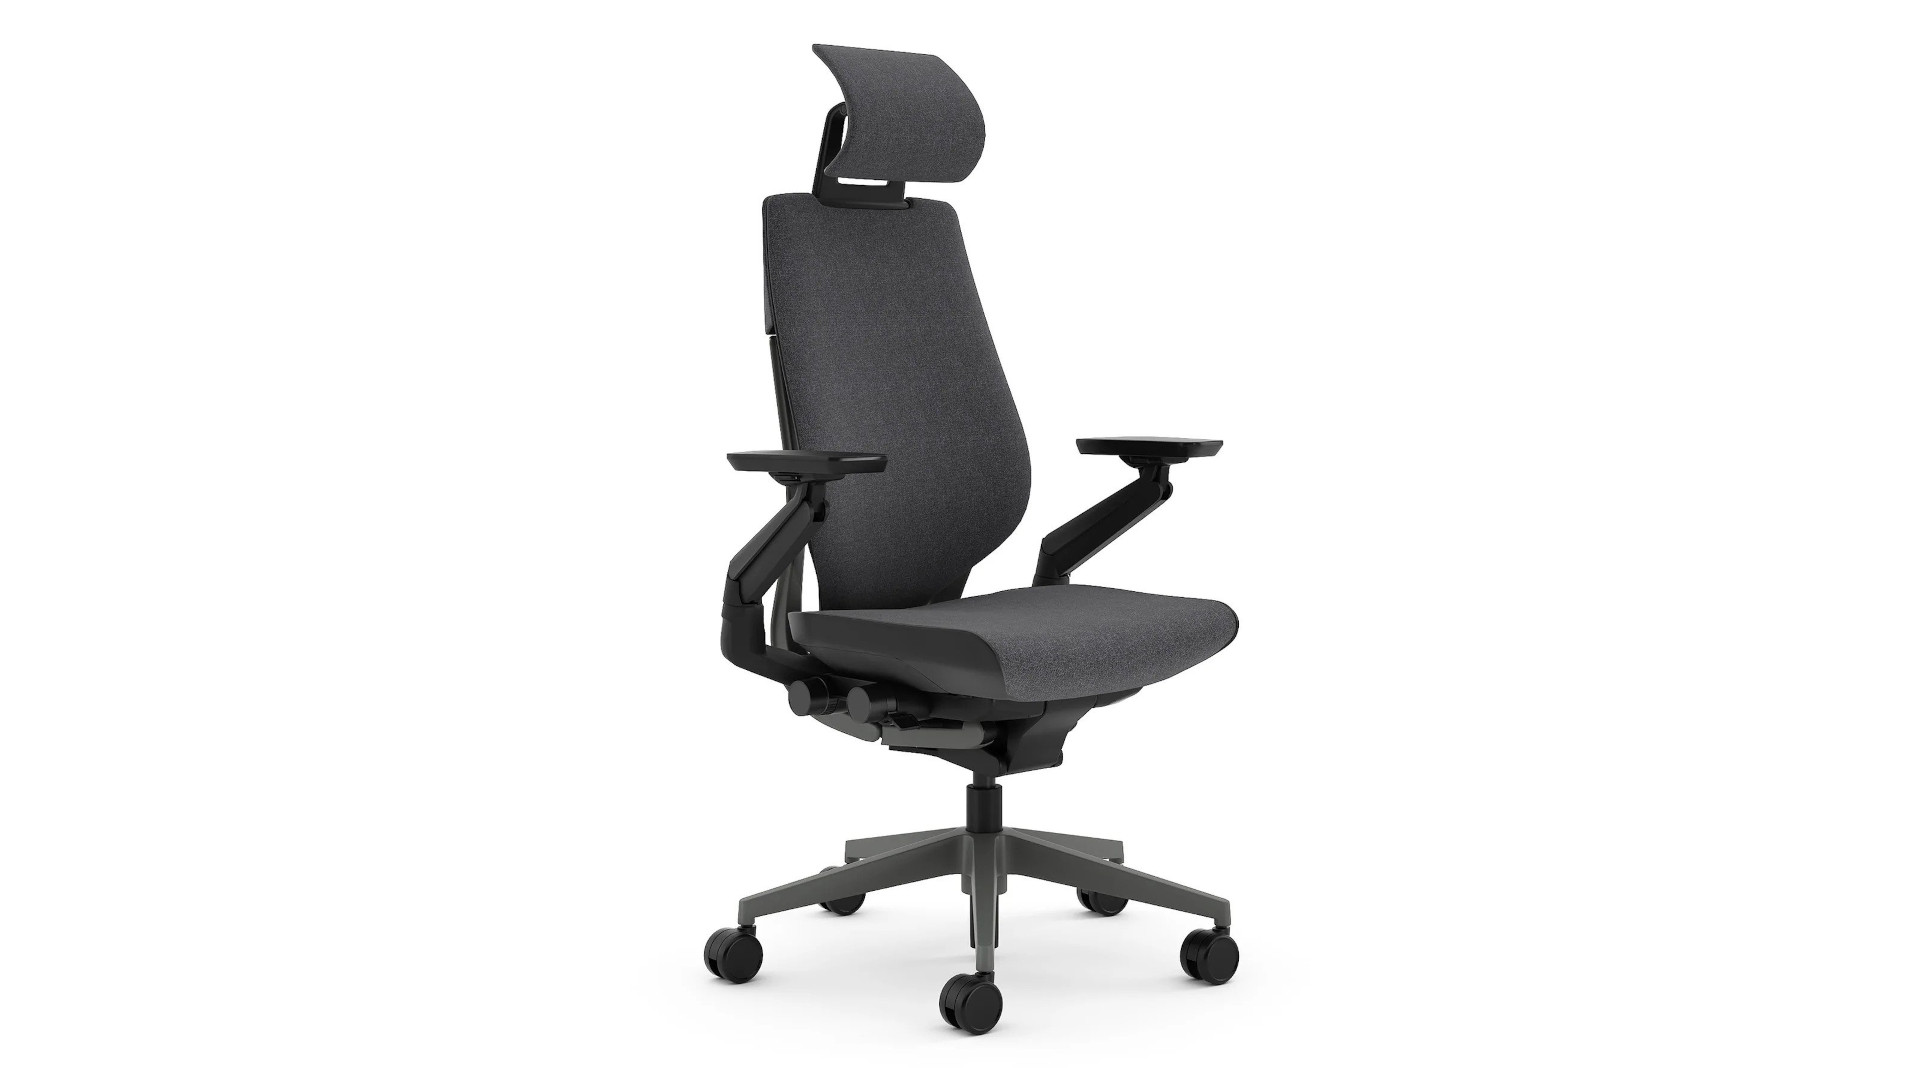 The Steelcase gesture gaming chair